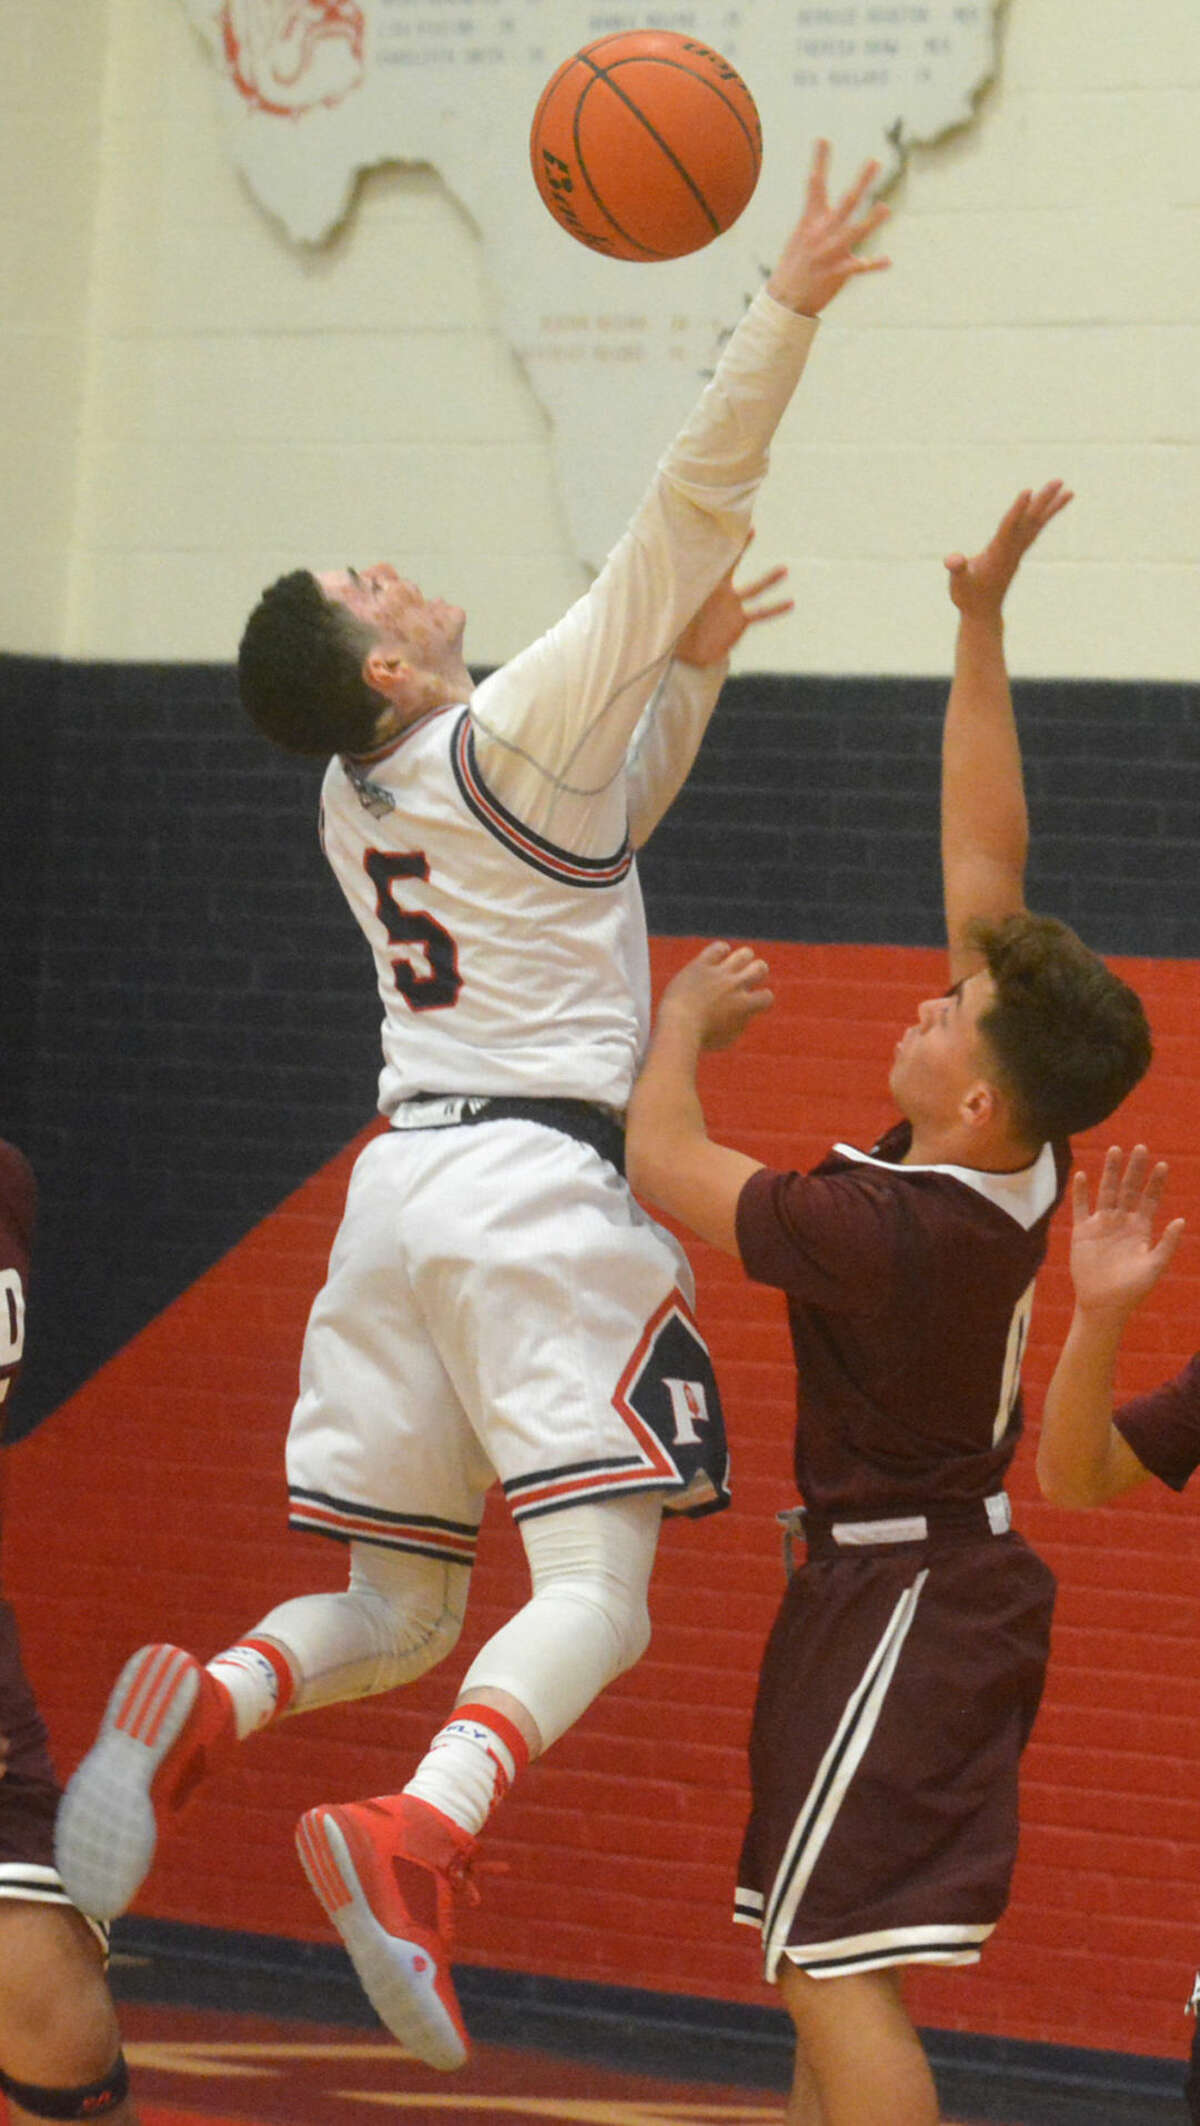 Plainview point guard Jayton Ellis (5) is fouled as he goes up for a shot during a game against Hereford Tuesday night. Ellis scored nine points to help the Bulldogs to a 69-64 victory to raise their record to 10-3.